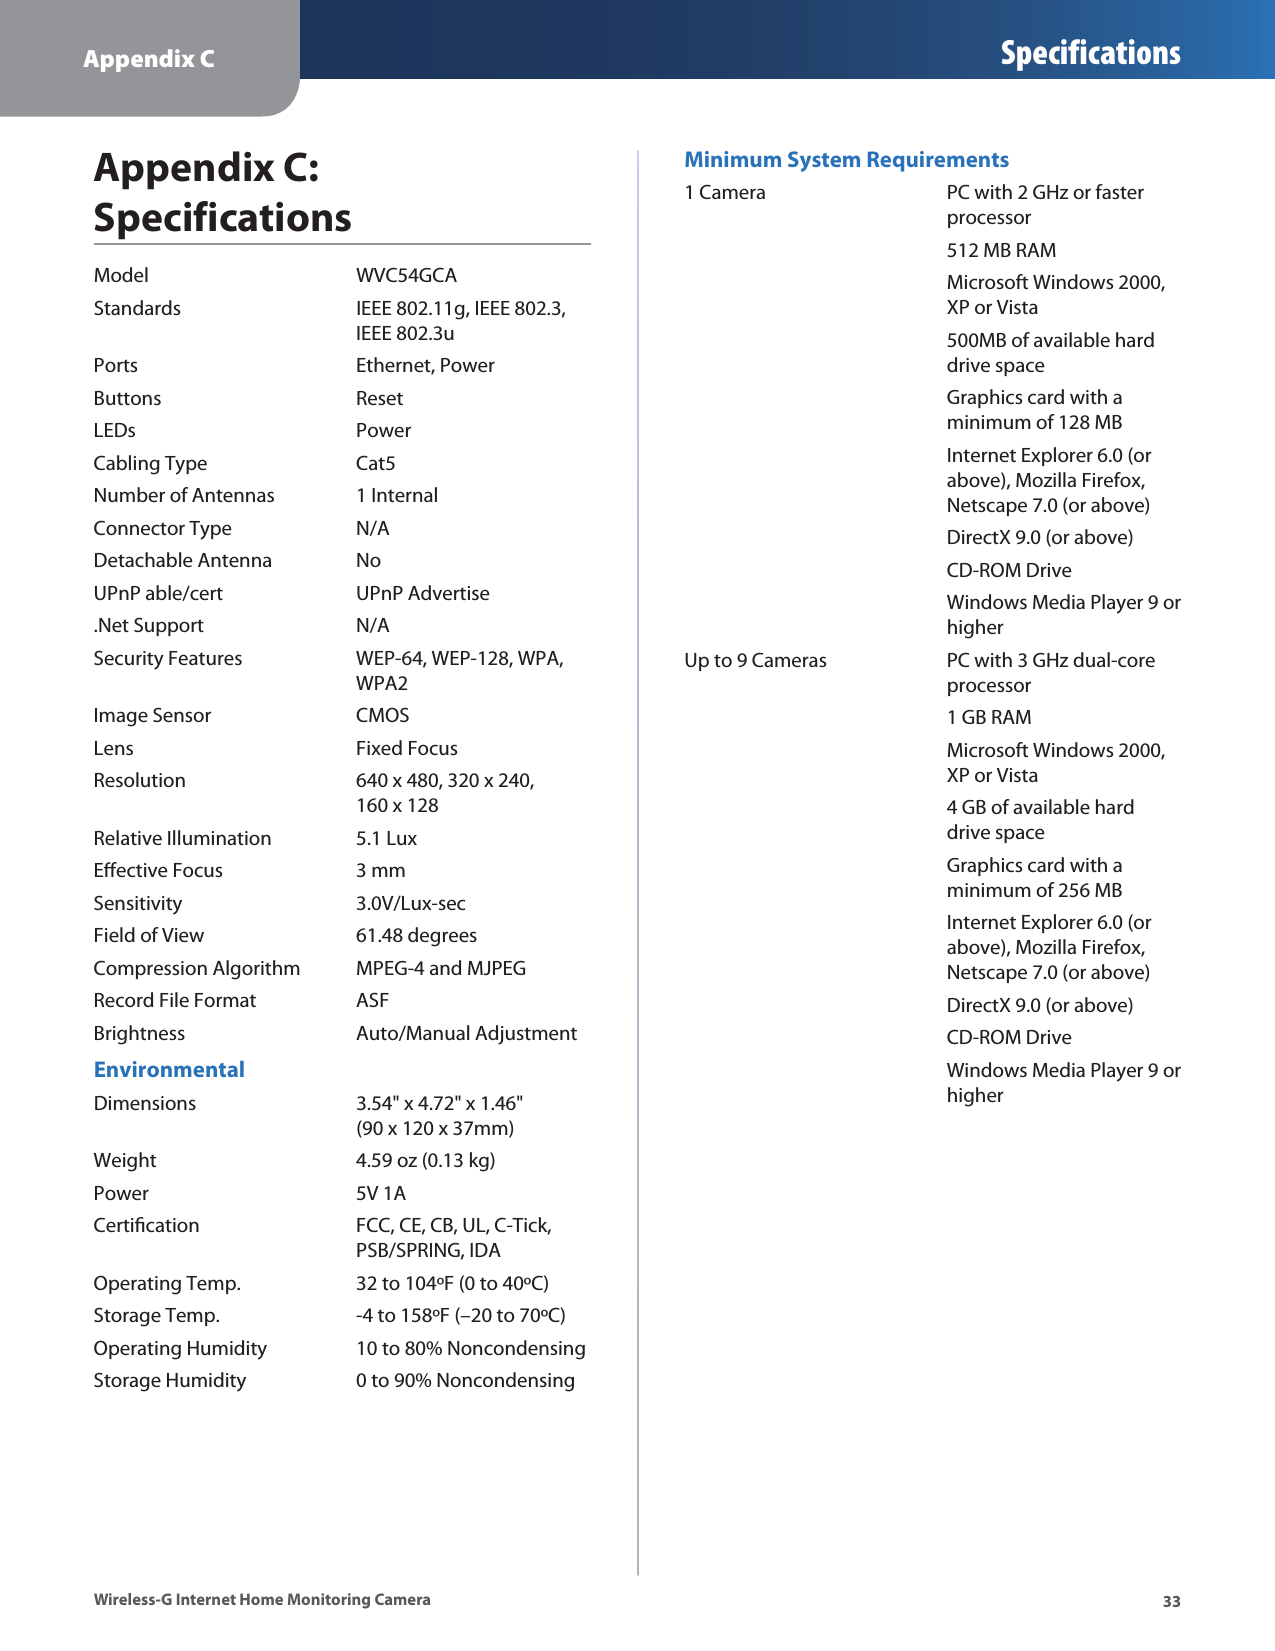 Appendix CSpecifications33Wireless-G Internet Home Monitoring CameraAppendix C:  SpecificationsModel  WVC54GCAStandards IEEE 802.11g, IEEE 802.3,   IEEE 802.3uPorts Ethernet, PowerButtons ResetLEDs PowerCabling Type Cat5Number of Antennas 1 InternalConnector Type N/ADetachable Antenna NoUPnP able/cert UPnP Advertise.Net Support N/ASecurity Features WEP-64, WEP-128, WPA,  WPA2 Image Sensor CMOSLens Fixed FocusResolution 640 x 480, 320 x 240,   160 x 128Relative Illumination 5.1 LuxEective Focus 3 mmSensitivity 3.0V/Lux-secField of View 61.48 degreesCompression Algorithm MPEG-4 and MJPEGRecord File Format ASFBrightness Auto/Manual AdjustmentEnvironmentalDimensions 3.54&quot; x 4.72&quot; x 1.46&quot;   (90 x 120 x 37mm) Weight 4.59 oz (0.13 kg) Power 5V 1ACertication FCC, CE, CB, UL, C-Tick,  PSB/SPRING, IDAOperating Temp. 32 to 104ºF (0 to 40ºC)Storage Temp. -4 to 158ºF (–20 to 70ºC)Operating Humidity 10 to 80% NoncondensingStorage Humidity 0 to 90% NoncondensingMinimum System Requirements1 Camera PC with 2 GHz or faster   processor 512 MB RAM Microsoft Windows 2000,   XP or Vista 500MB of available hard   drive space Graphics card with a   minimum of 128 MB Internet Explorer 6.0 (or   above), Mozilla Firefox,   Netscape 7.0 (or above) DirectX 9.0 (or above) CD-ROM Drive Windows Media Player 9 or   higherUp to 9 Cameras PC with 3 GHz dual-core   processor 1 GB RAM Microsoft Windows 2000,   XP or Vista 4 GB of available hard   drive space Graphics card with a   minimum of 256 MB Internet Explorer 6.0 (or   above), Mozilla Firefox,   Netscape 7.0 (or above) DirectX 9.0 (or above) CD-ROM Drive Windows Media Player 9 or   higher